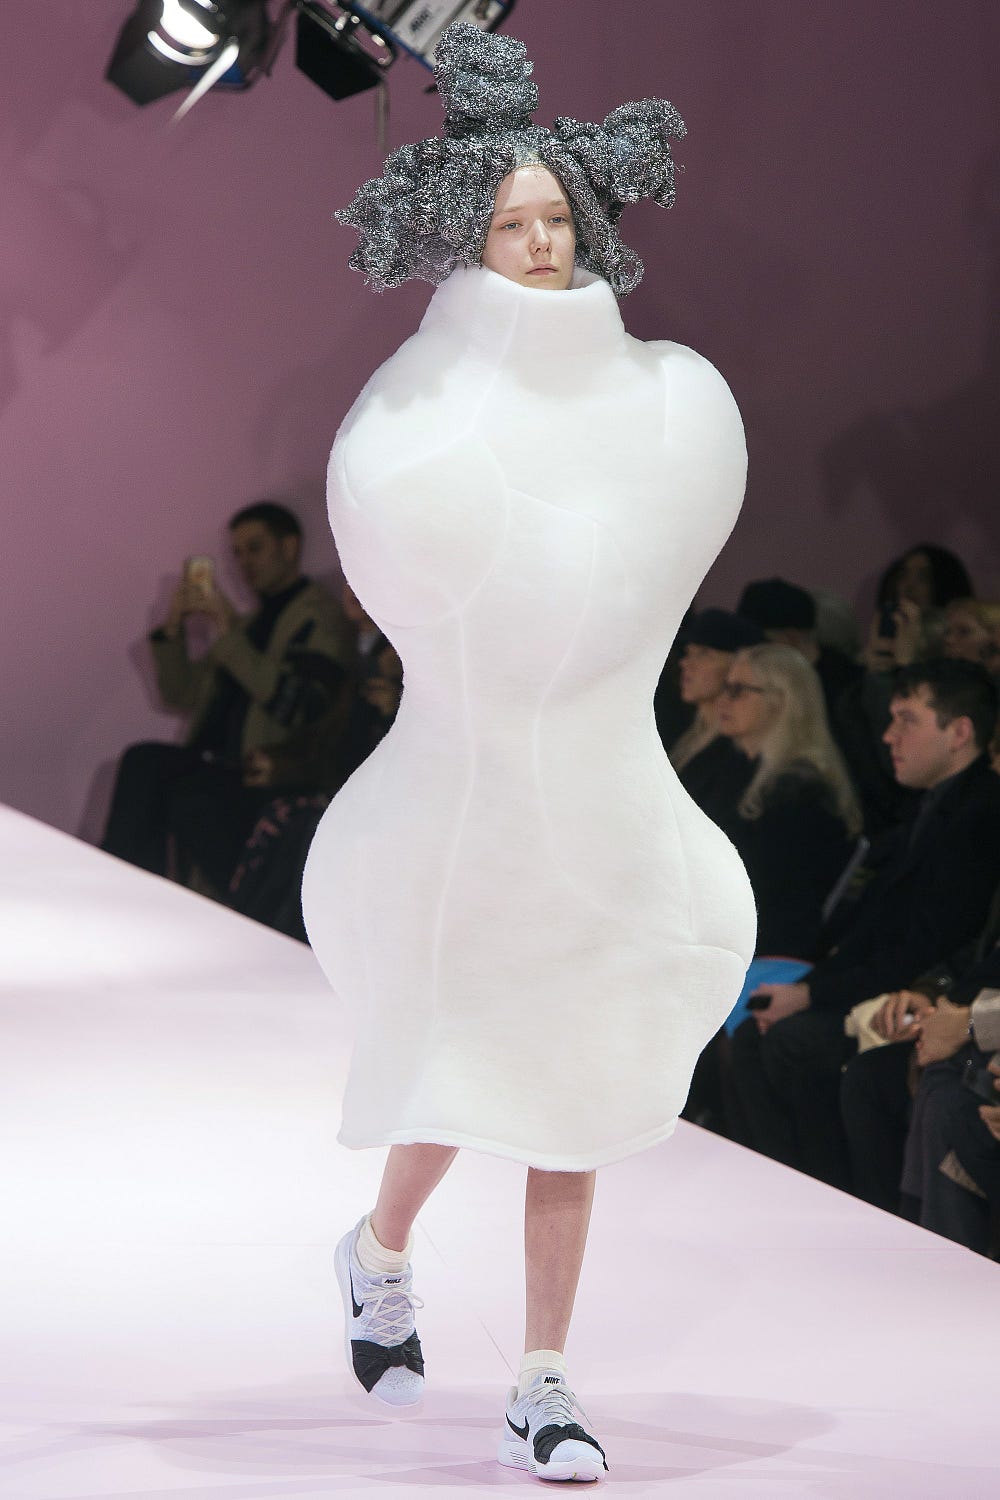 Why are Fashion shows filled unwearable garments? | Renaud Medium